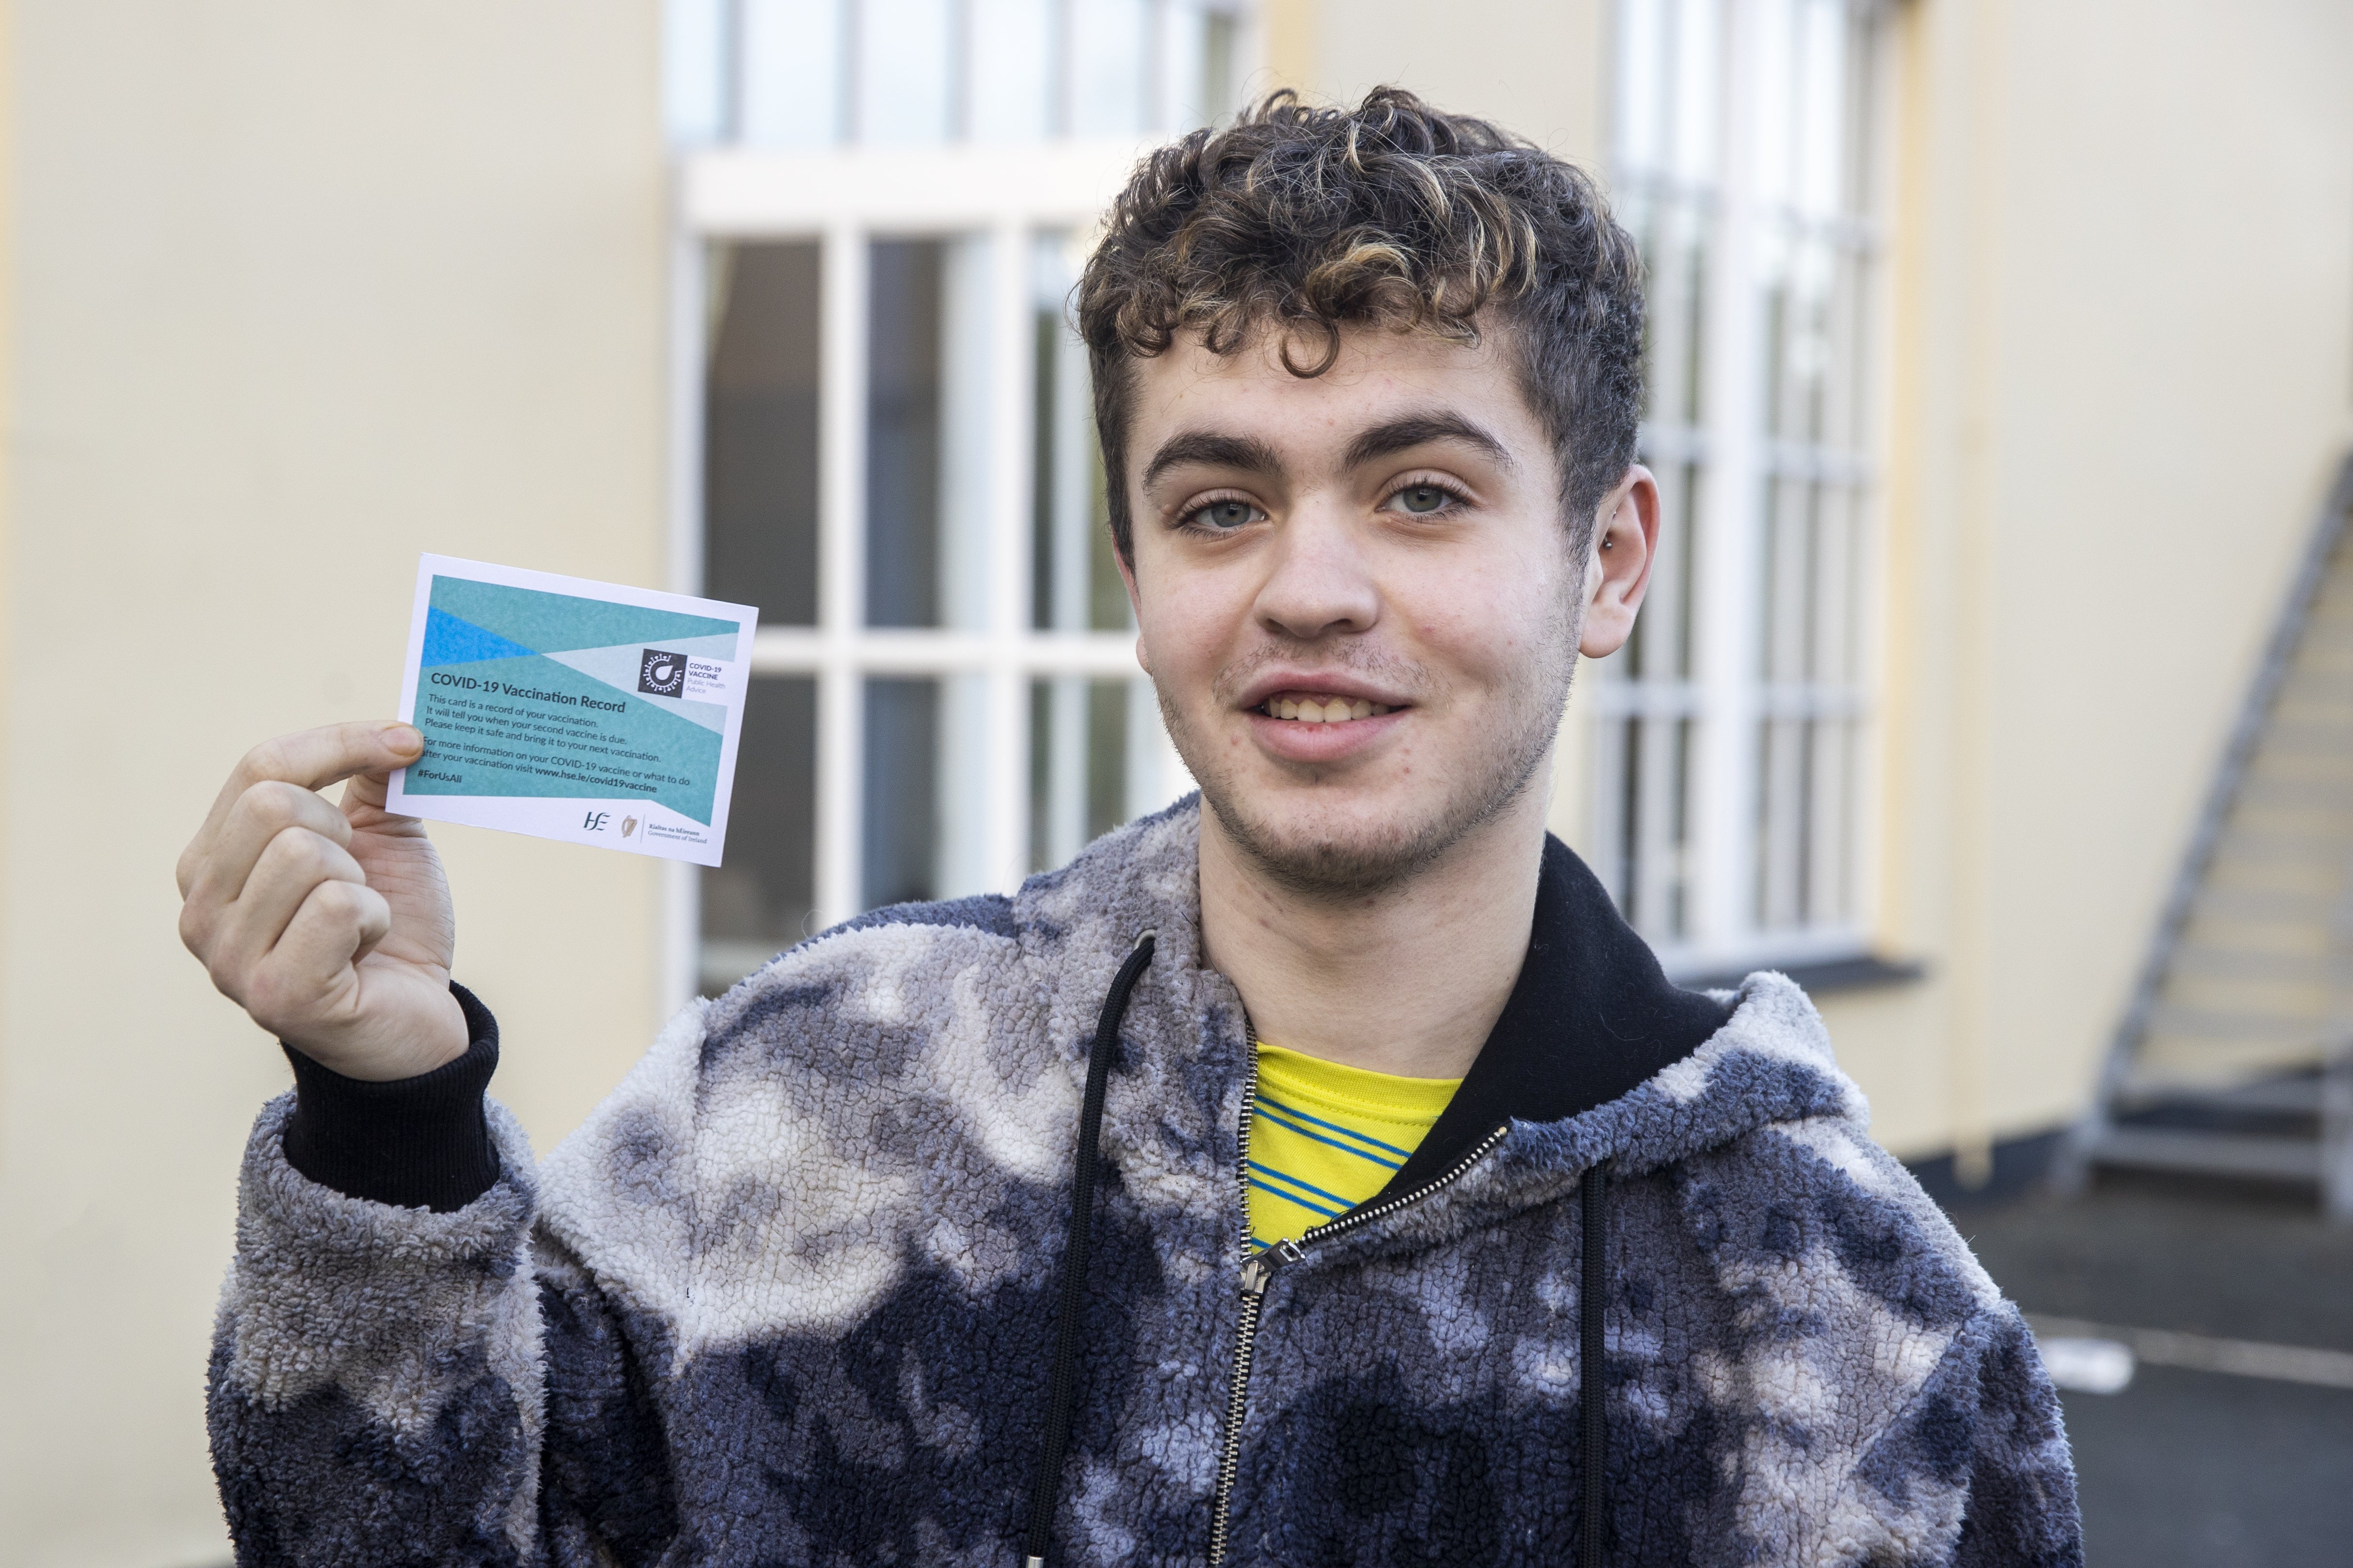 Ross Mshanen holds his Covid-19 Vaccination Record card at the Glencarn Hotel, Co Monaghan (Liam McBurney/PA)